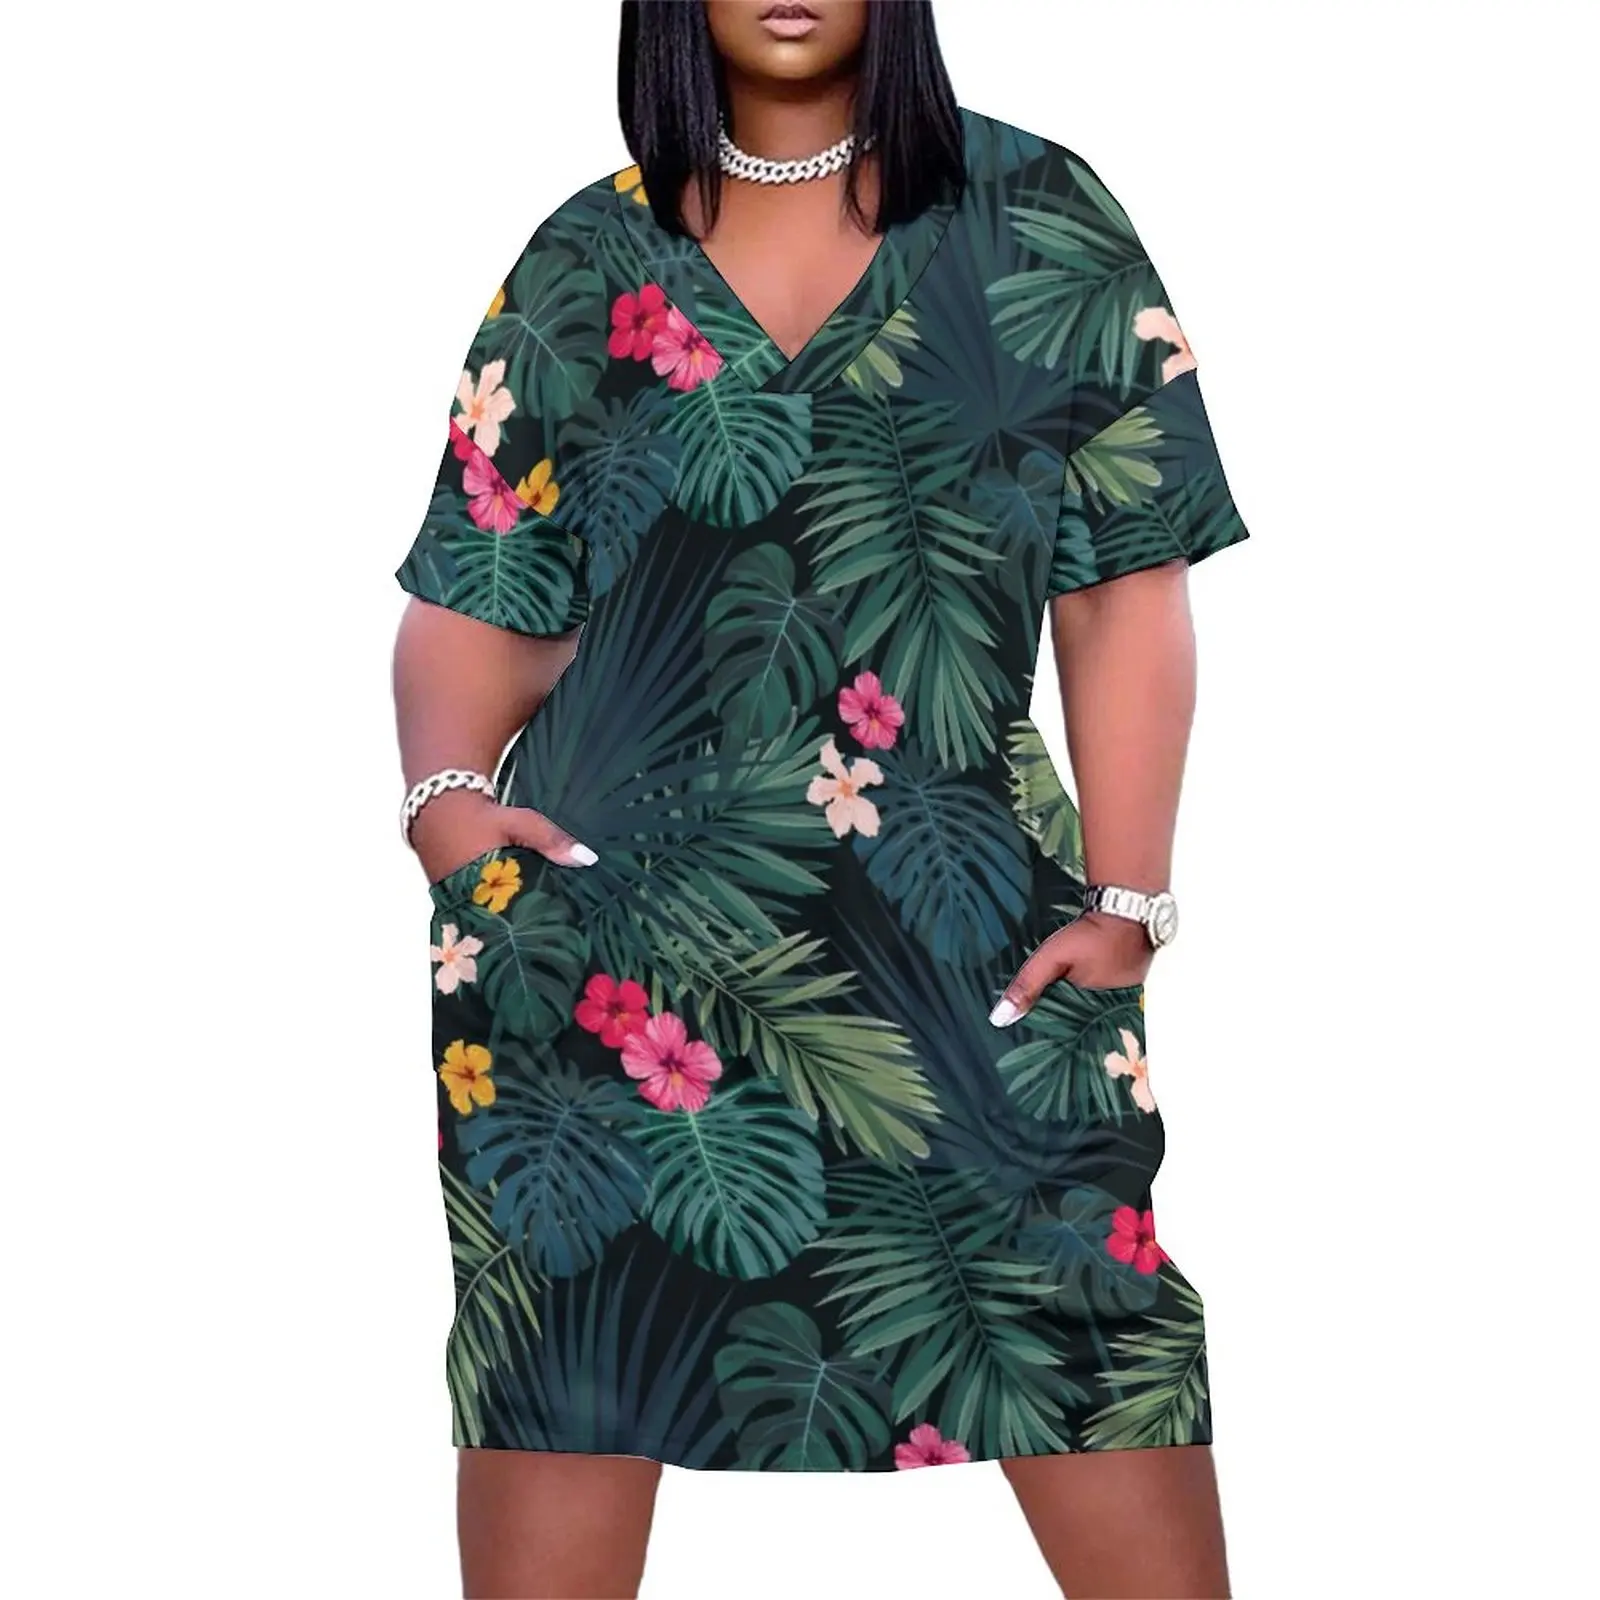 

Tropical Floral Print Dress Plus Size Hibiscus Blossom Aesthetic Casual Dress Womens Summer V Neck Stylish Dresses Birthday Gift